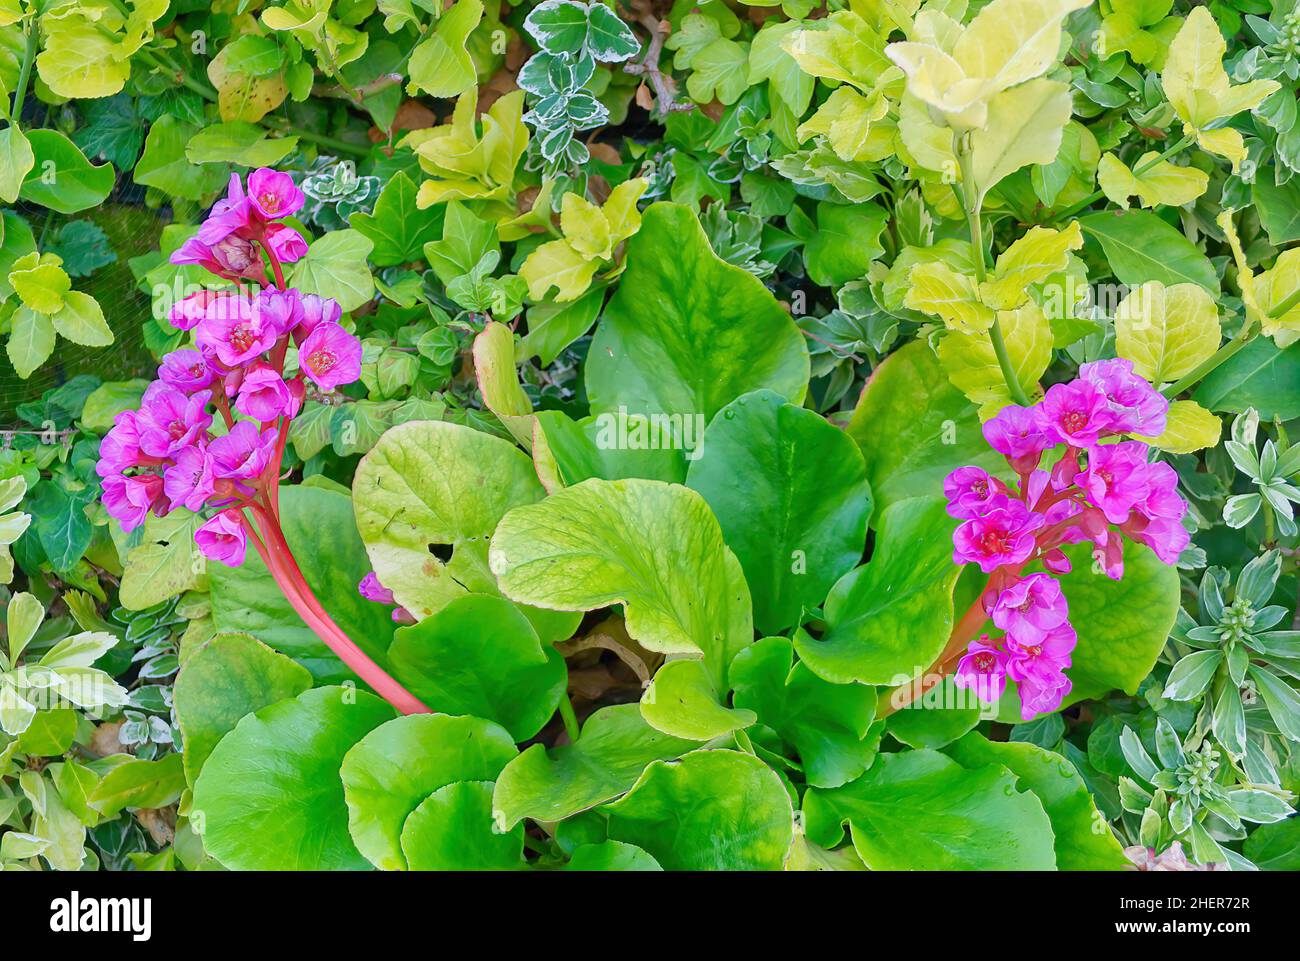 Purple bergenia (bergenia purpurascens) flowers with large, shiny green leaves growing on a living wall, Ashford Designer Outlet, Kent, UK Stock Photo